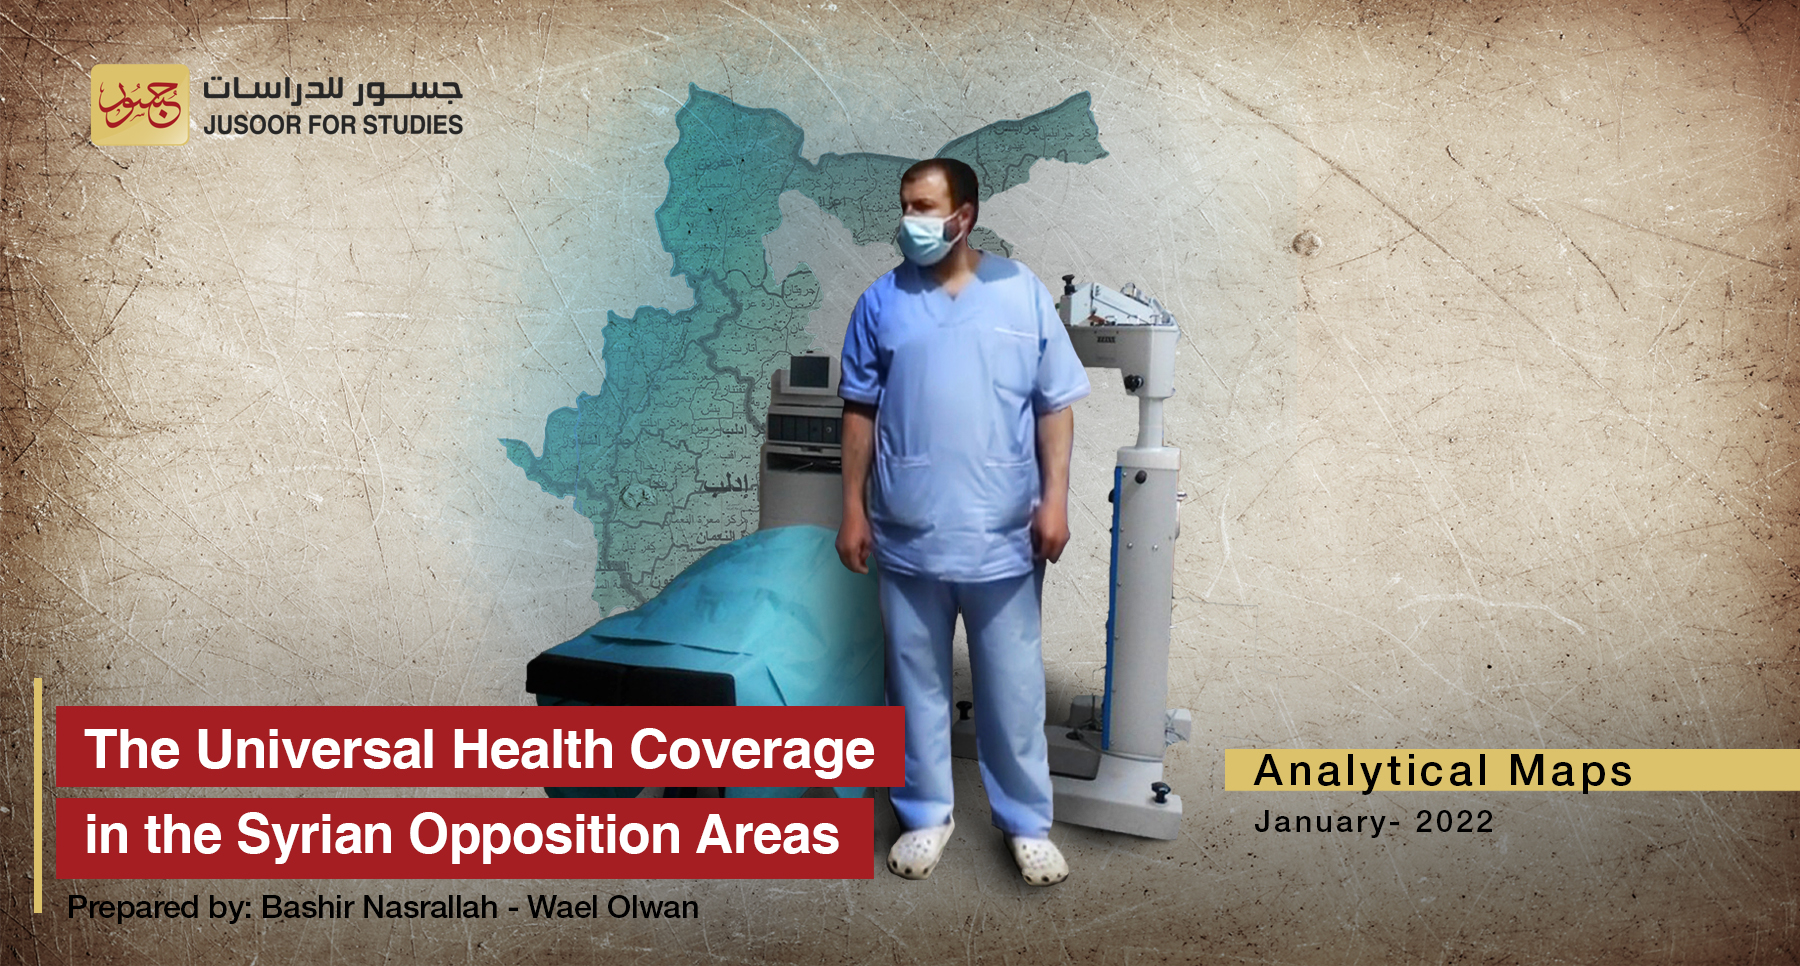 The Universal Health Coverage in the Syrian Opposition Areas